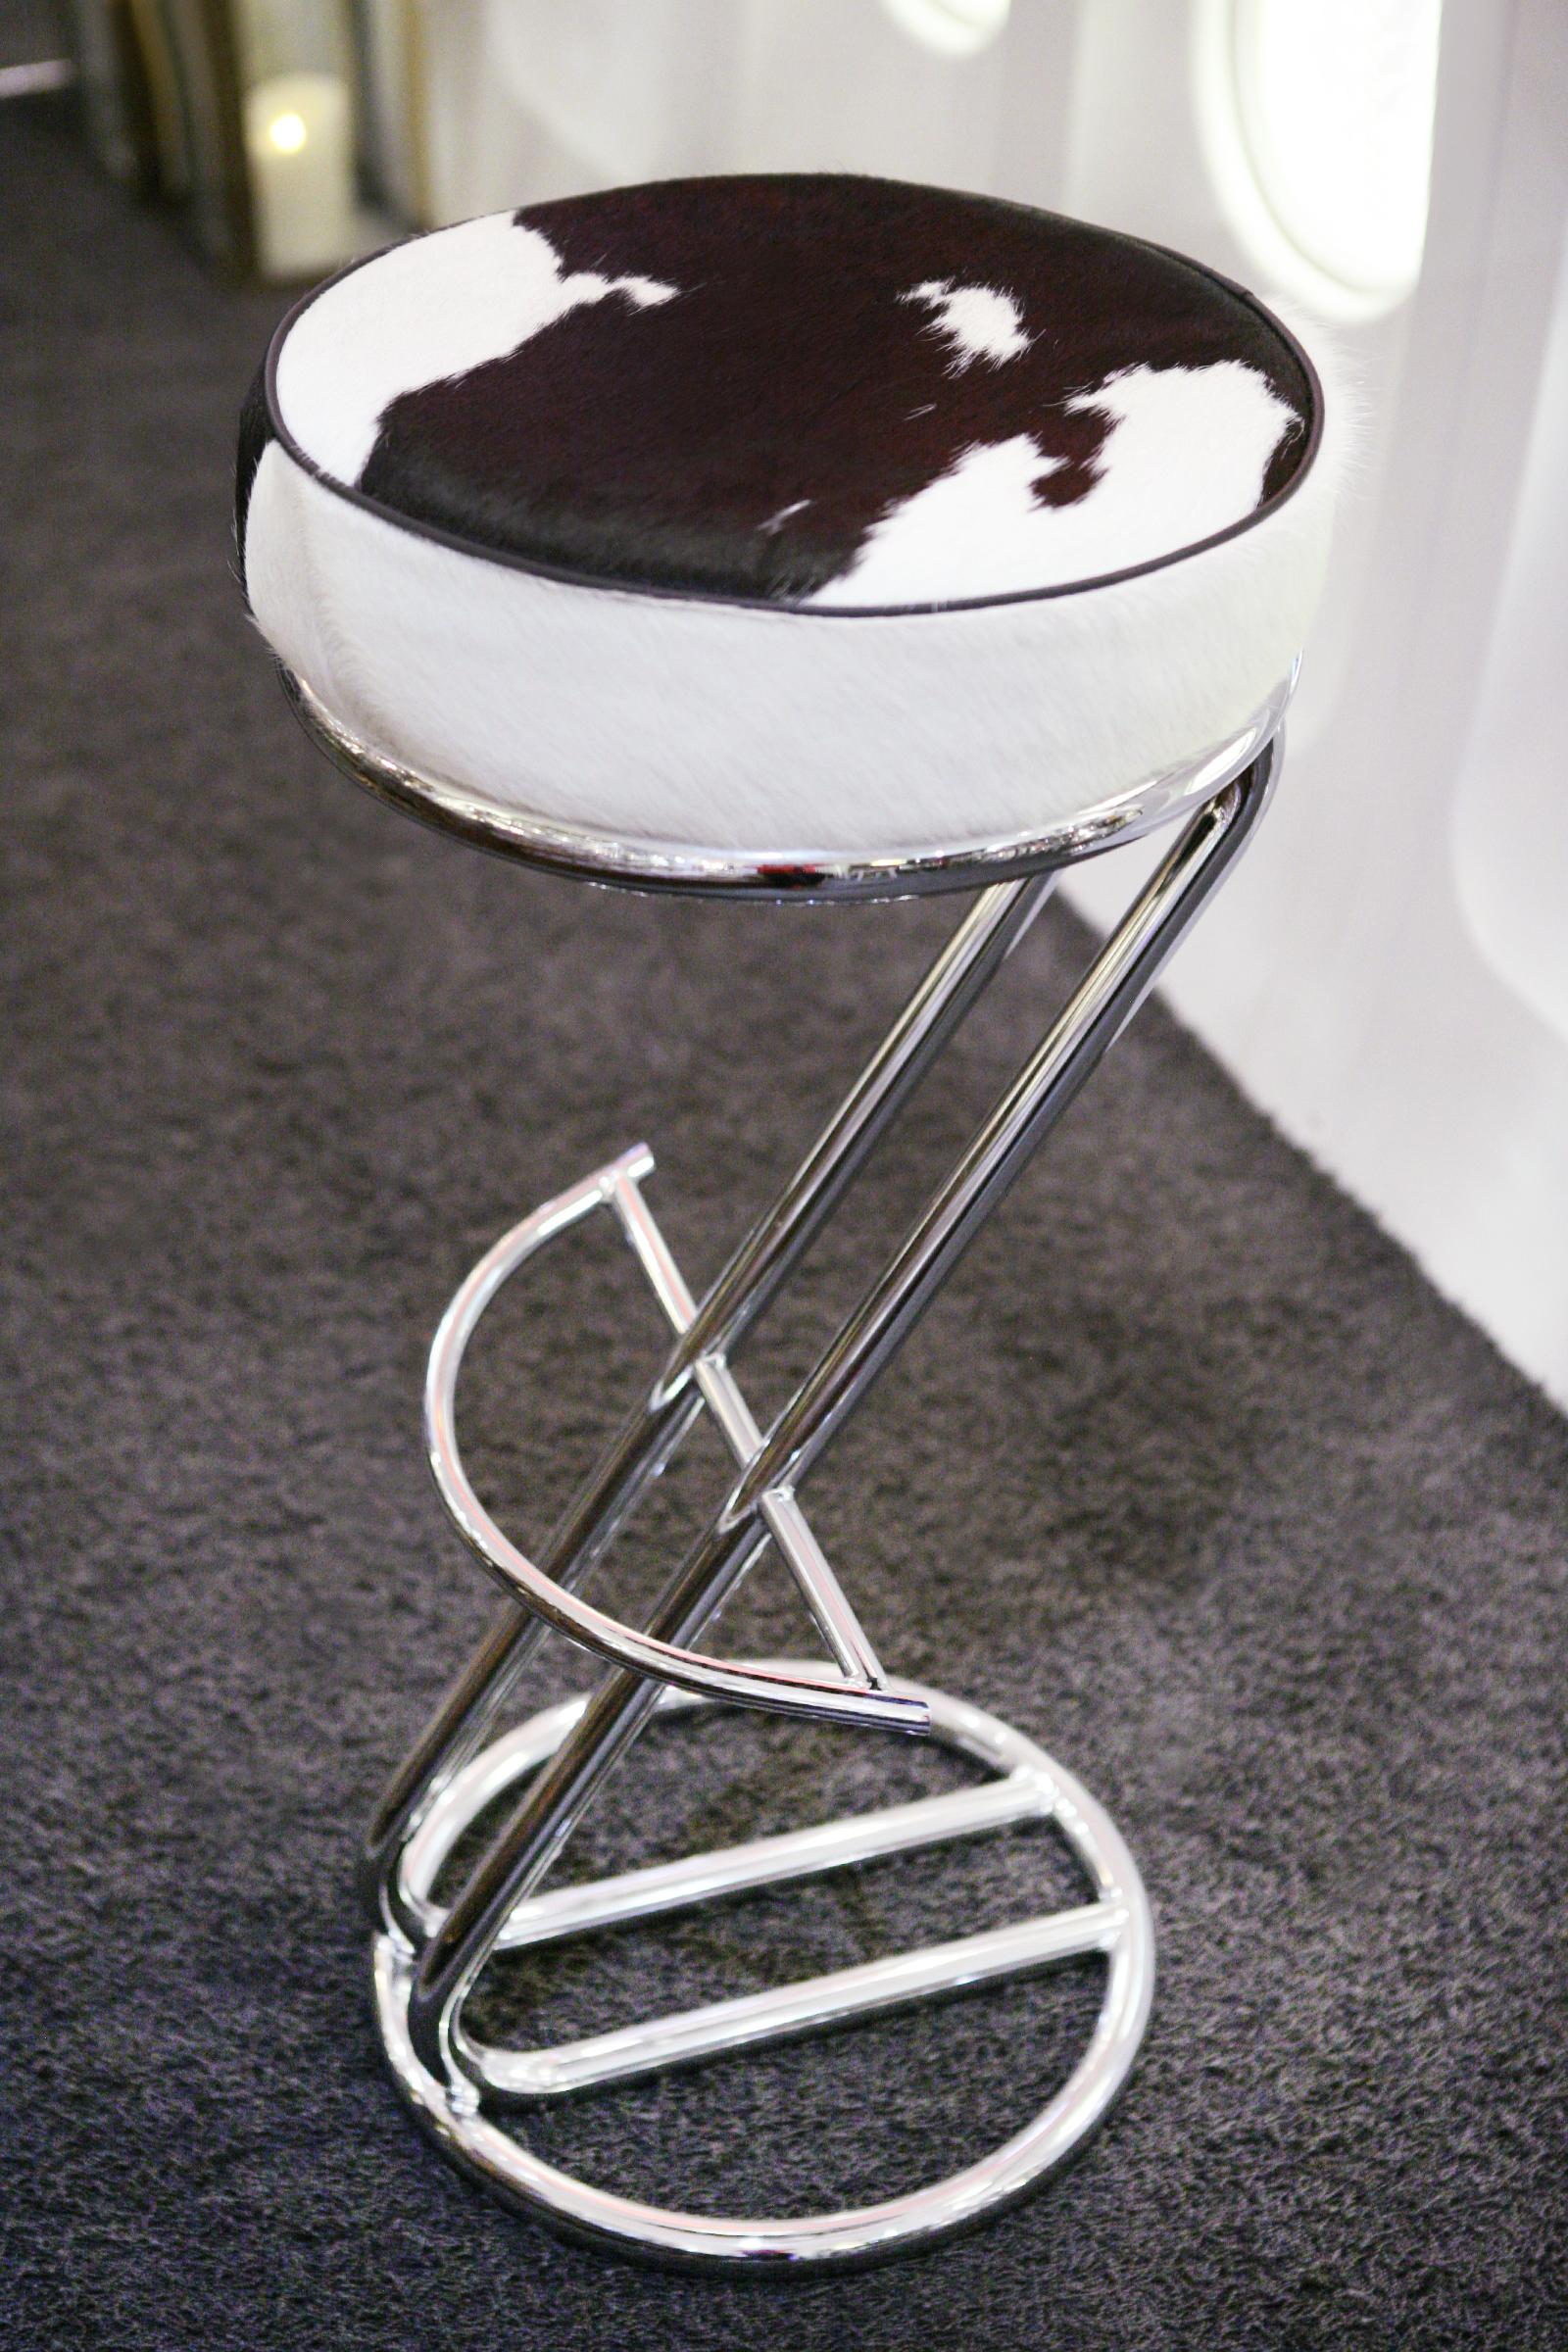 Bar Stool Pony 2 upholstered and covered with natural 
pony on polished stainless steel base. With foot rest.
Also available in Bar Stool Pony 1.